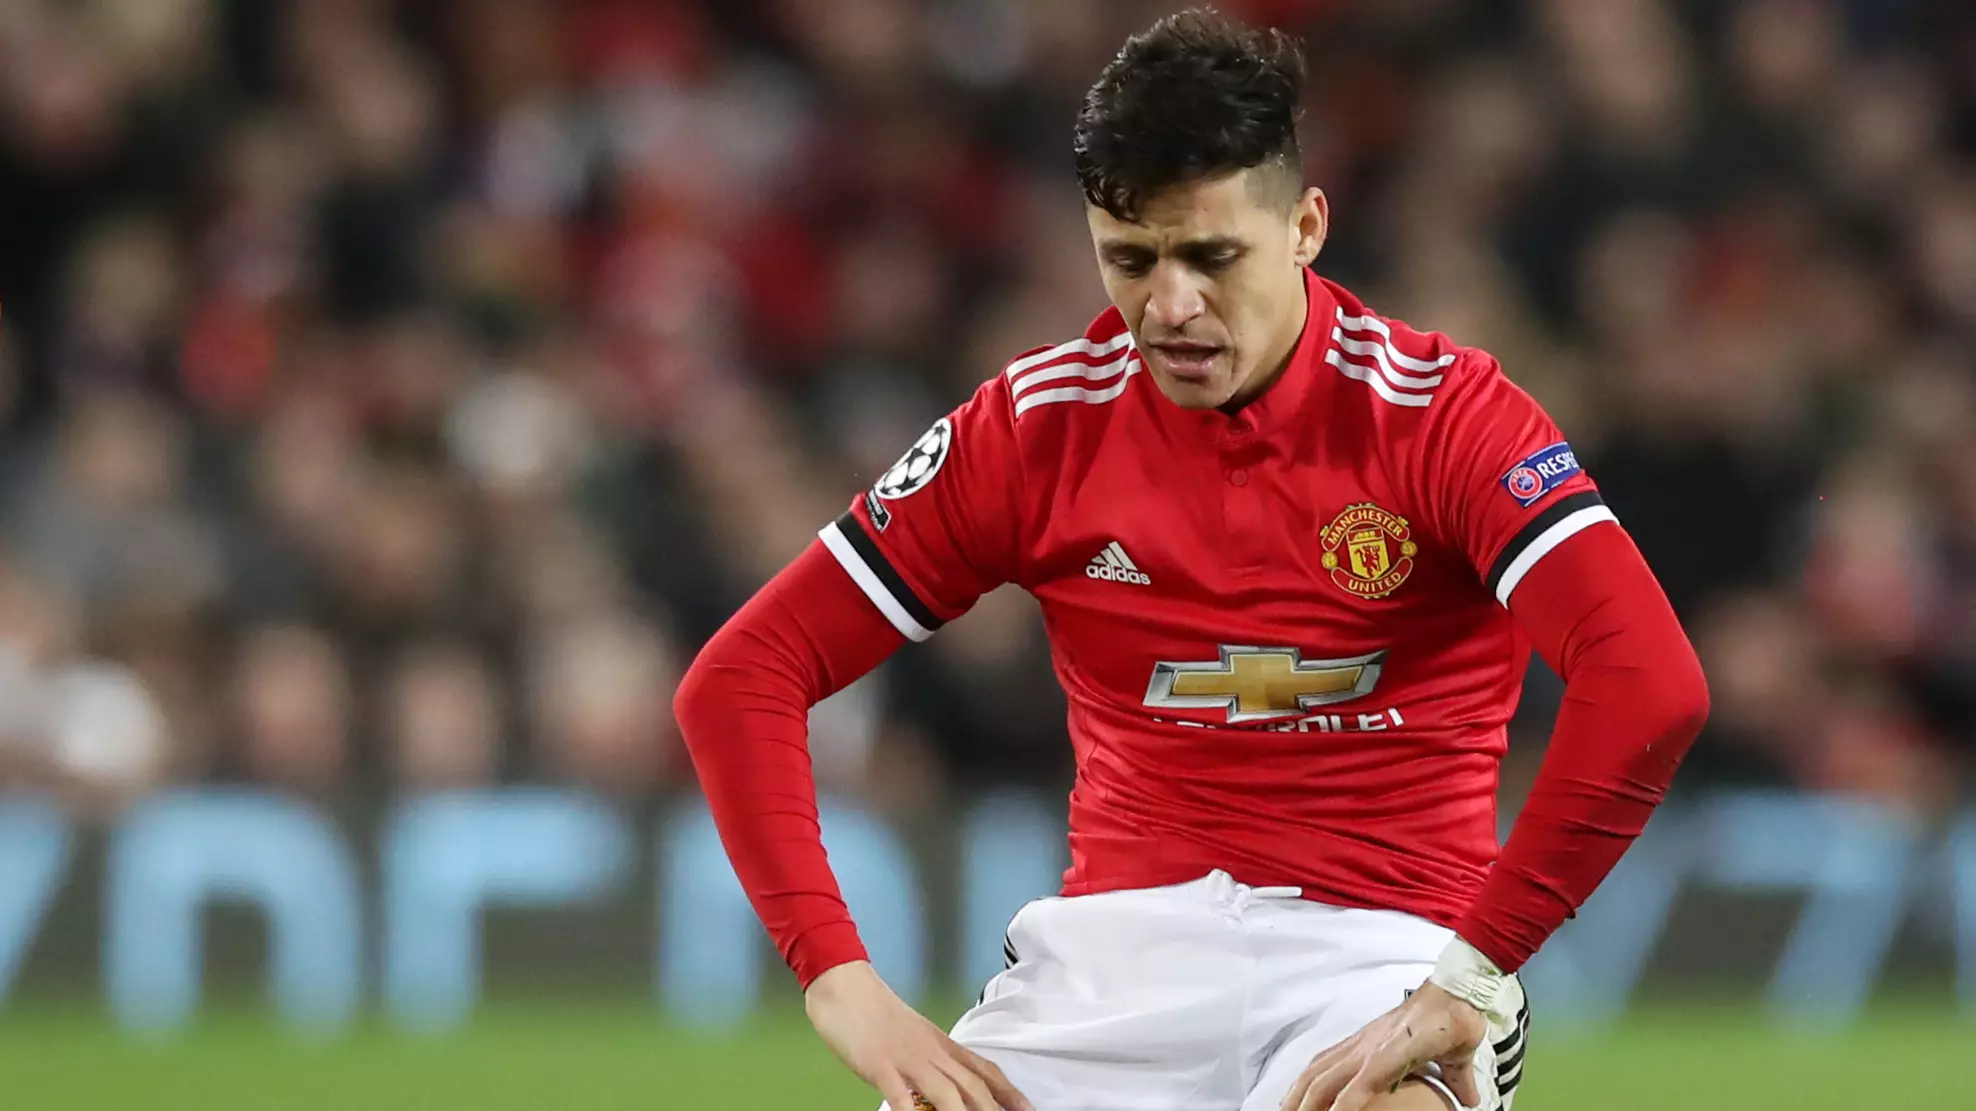 Alexis Sanchez Discusses Difficulties Since Signing For Manchester United